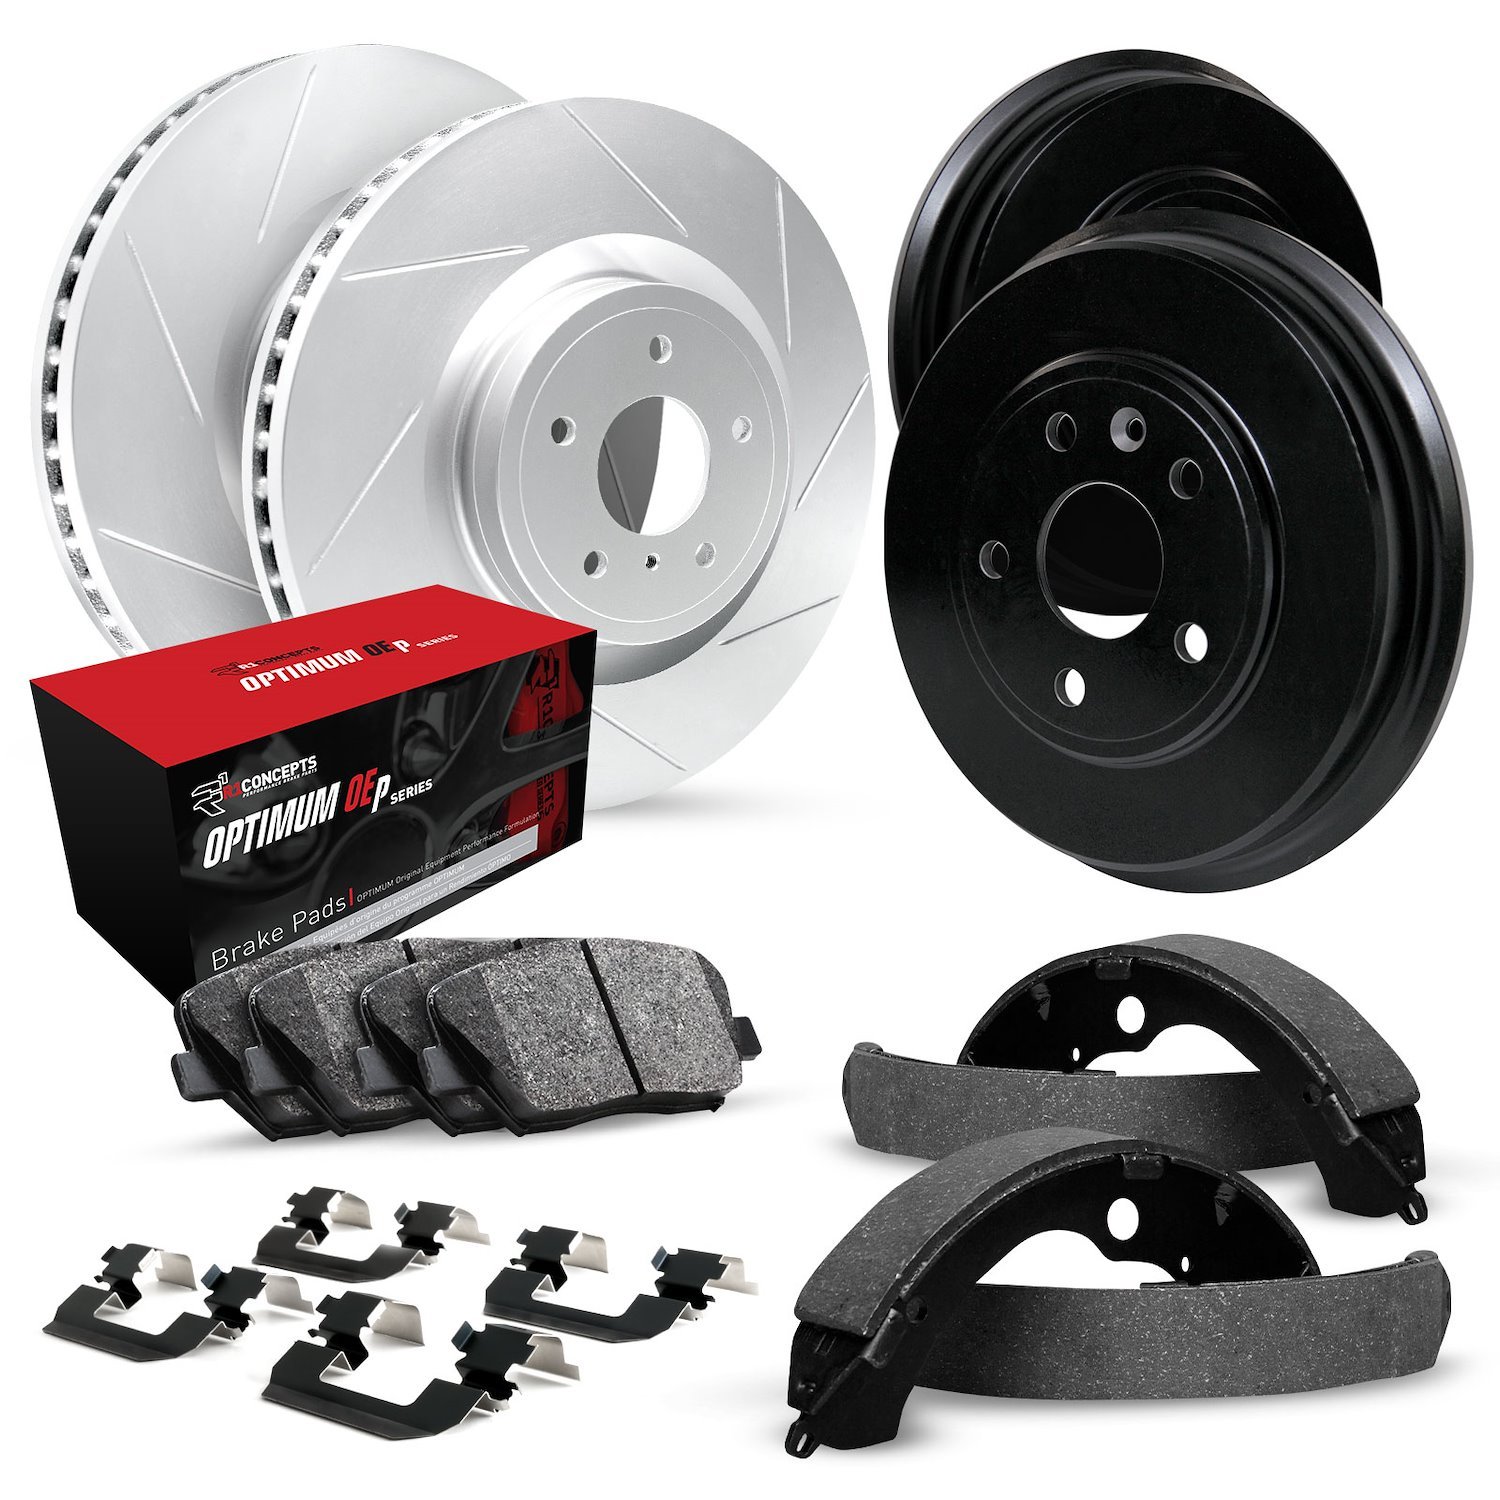 GEO-Carbon Slotted Brake Rotor & Drum Set w/Optimum OE Pads, Shoes, & Hardware, 2011-2019 Ford/Lincoln/Mercury/Mazda